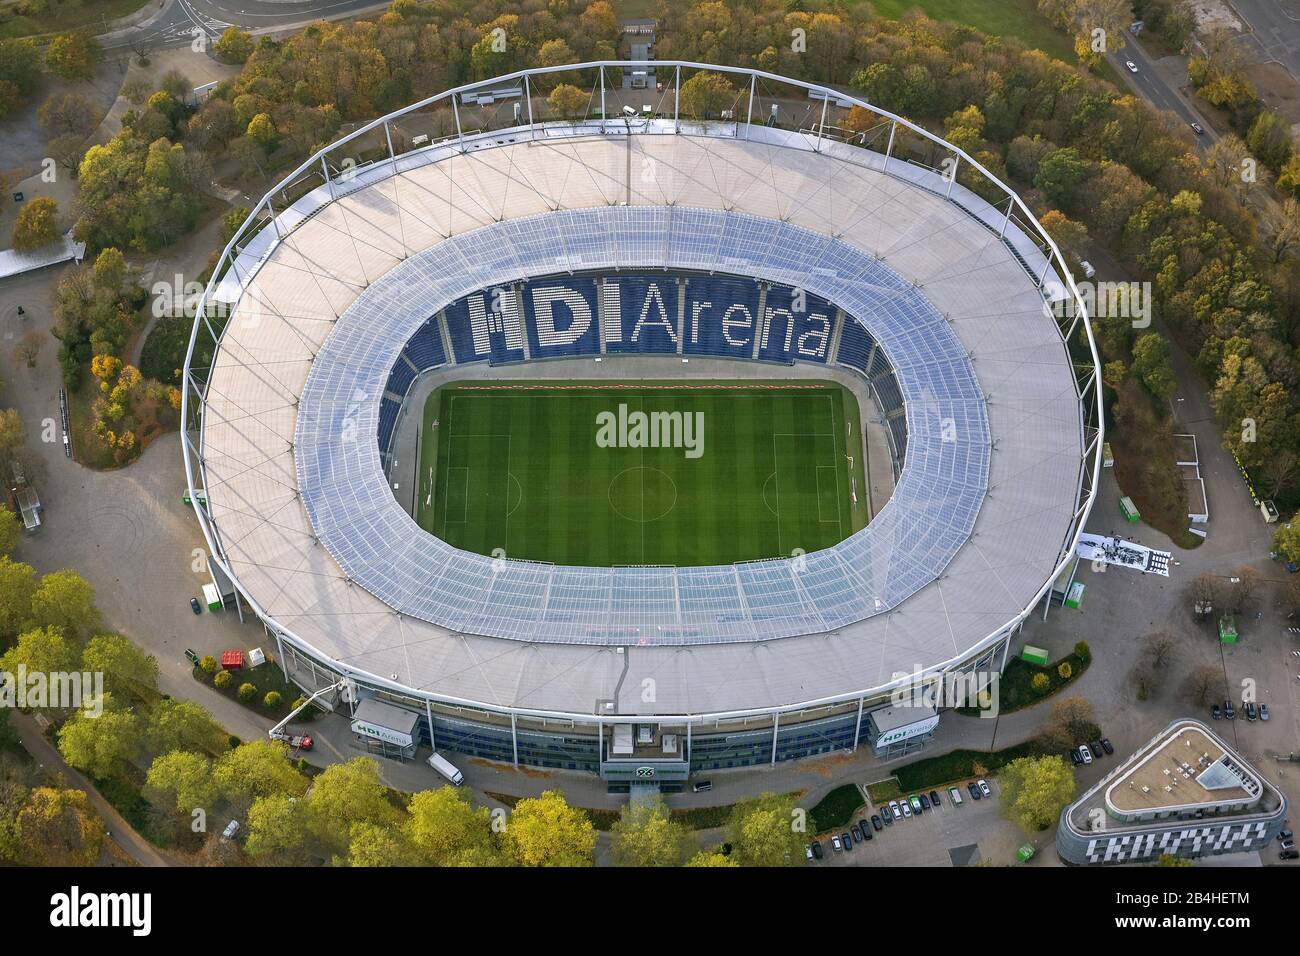 HDI Arena stadium in Calenberger Neustadt district of Hannover, 31.10.2013, aerial view, Germany, North Rhine-Westphalia, Hanover Stock Photo